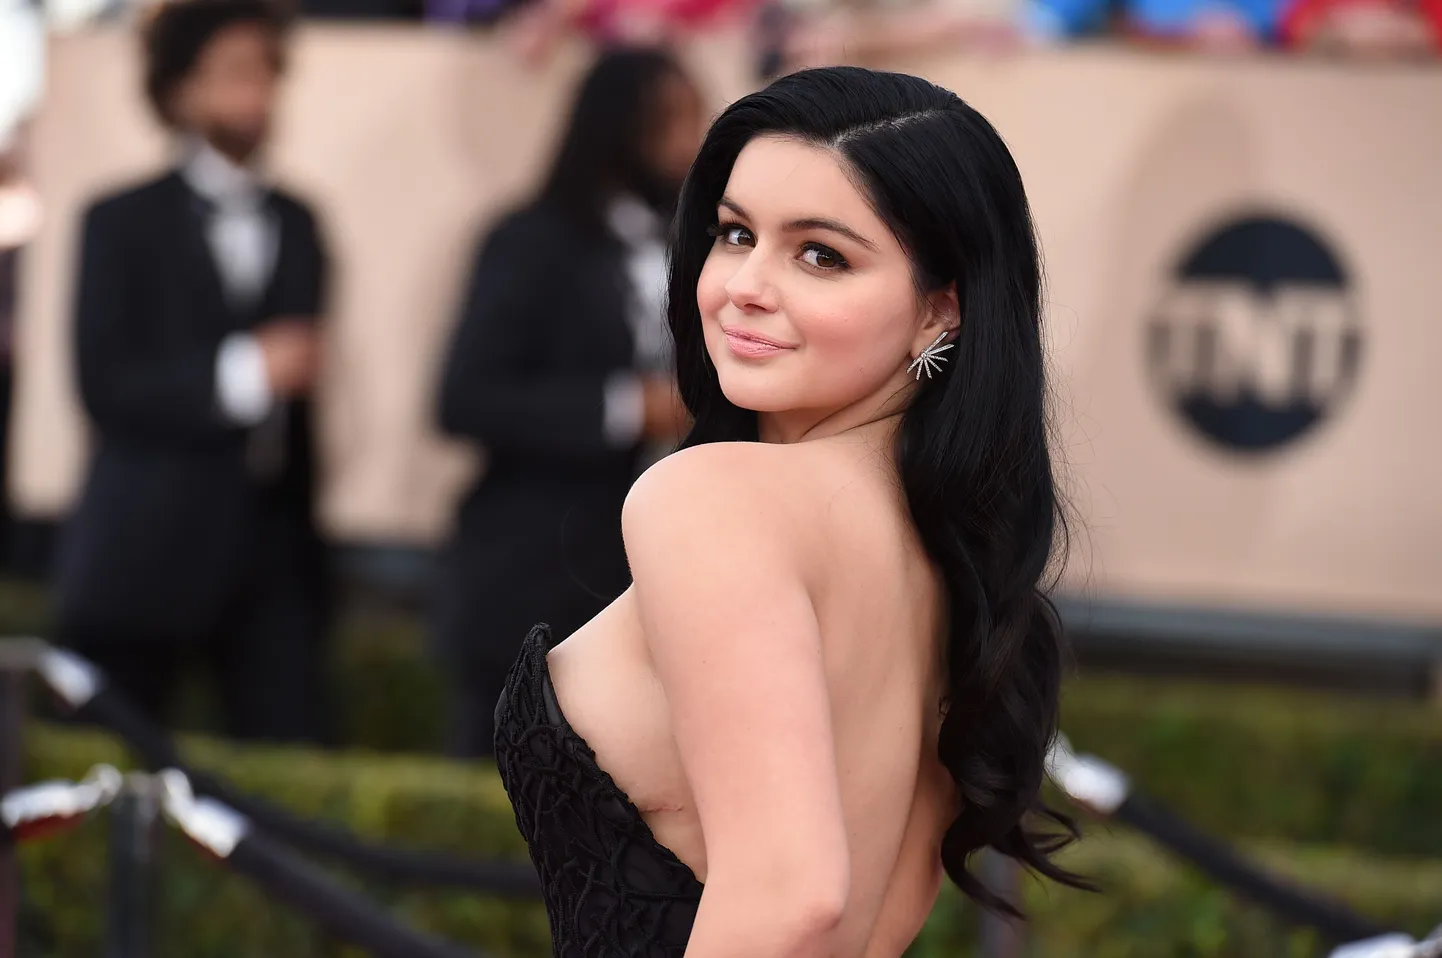 Ariel Winter arrives at the 22nd annual Screen Actors Guild Awards at the Shrine Auditorium & Expo Hall on Saturday, Jan. 30, 2016, in Los Angeles. (Photo by Jordan Strauss/Invision/AP)